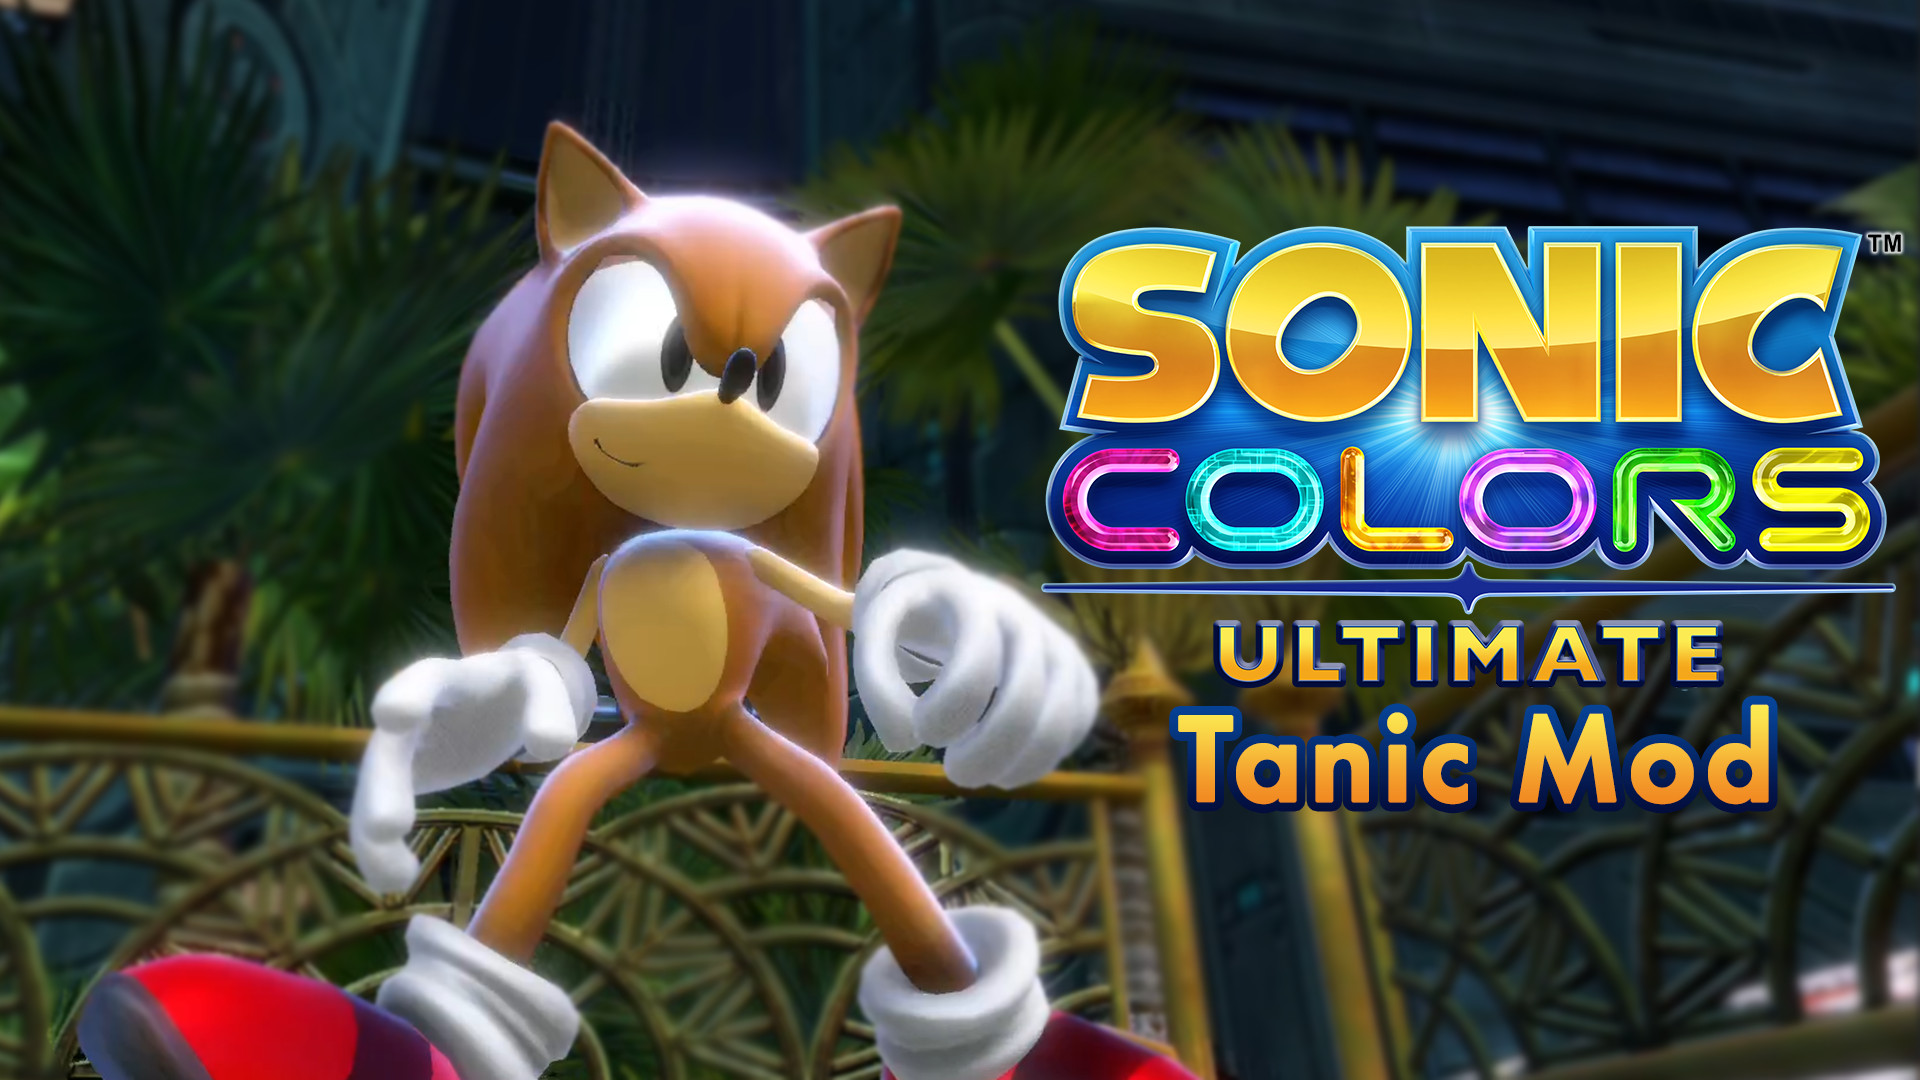 Tanic Mod [Unfinished] [Sonic Colors: Ultimate] [Works In Progress]